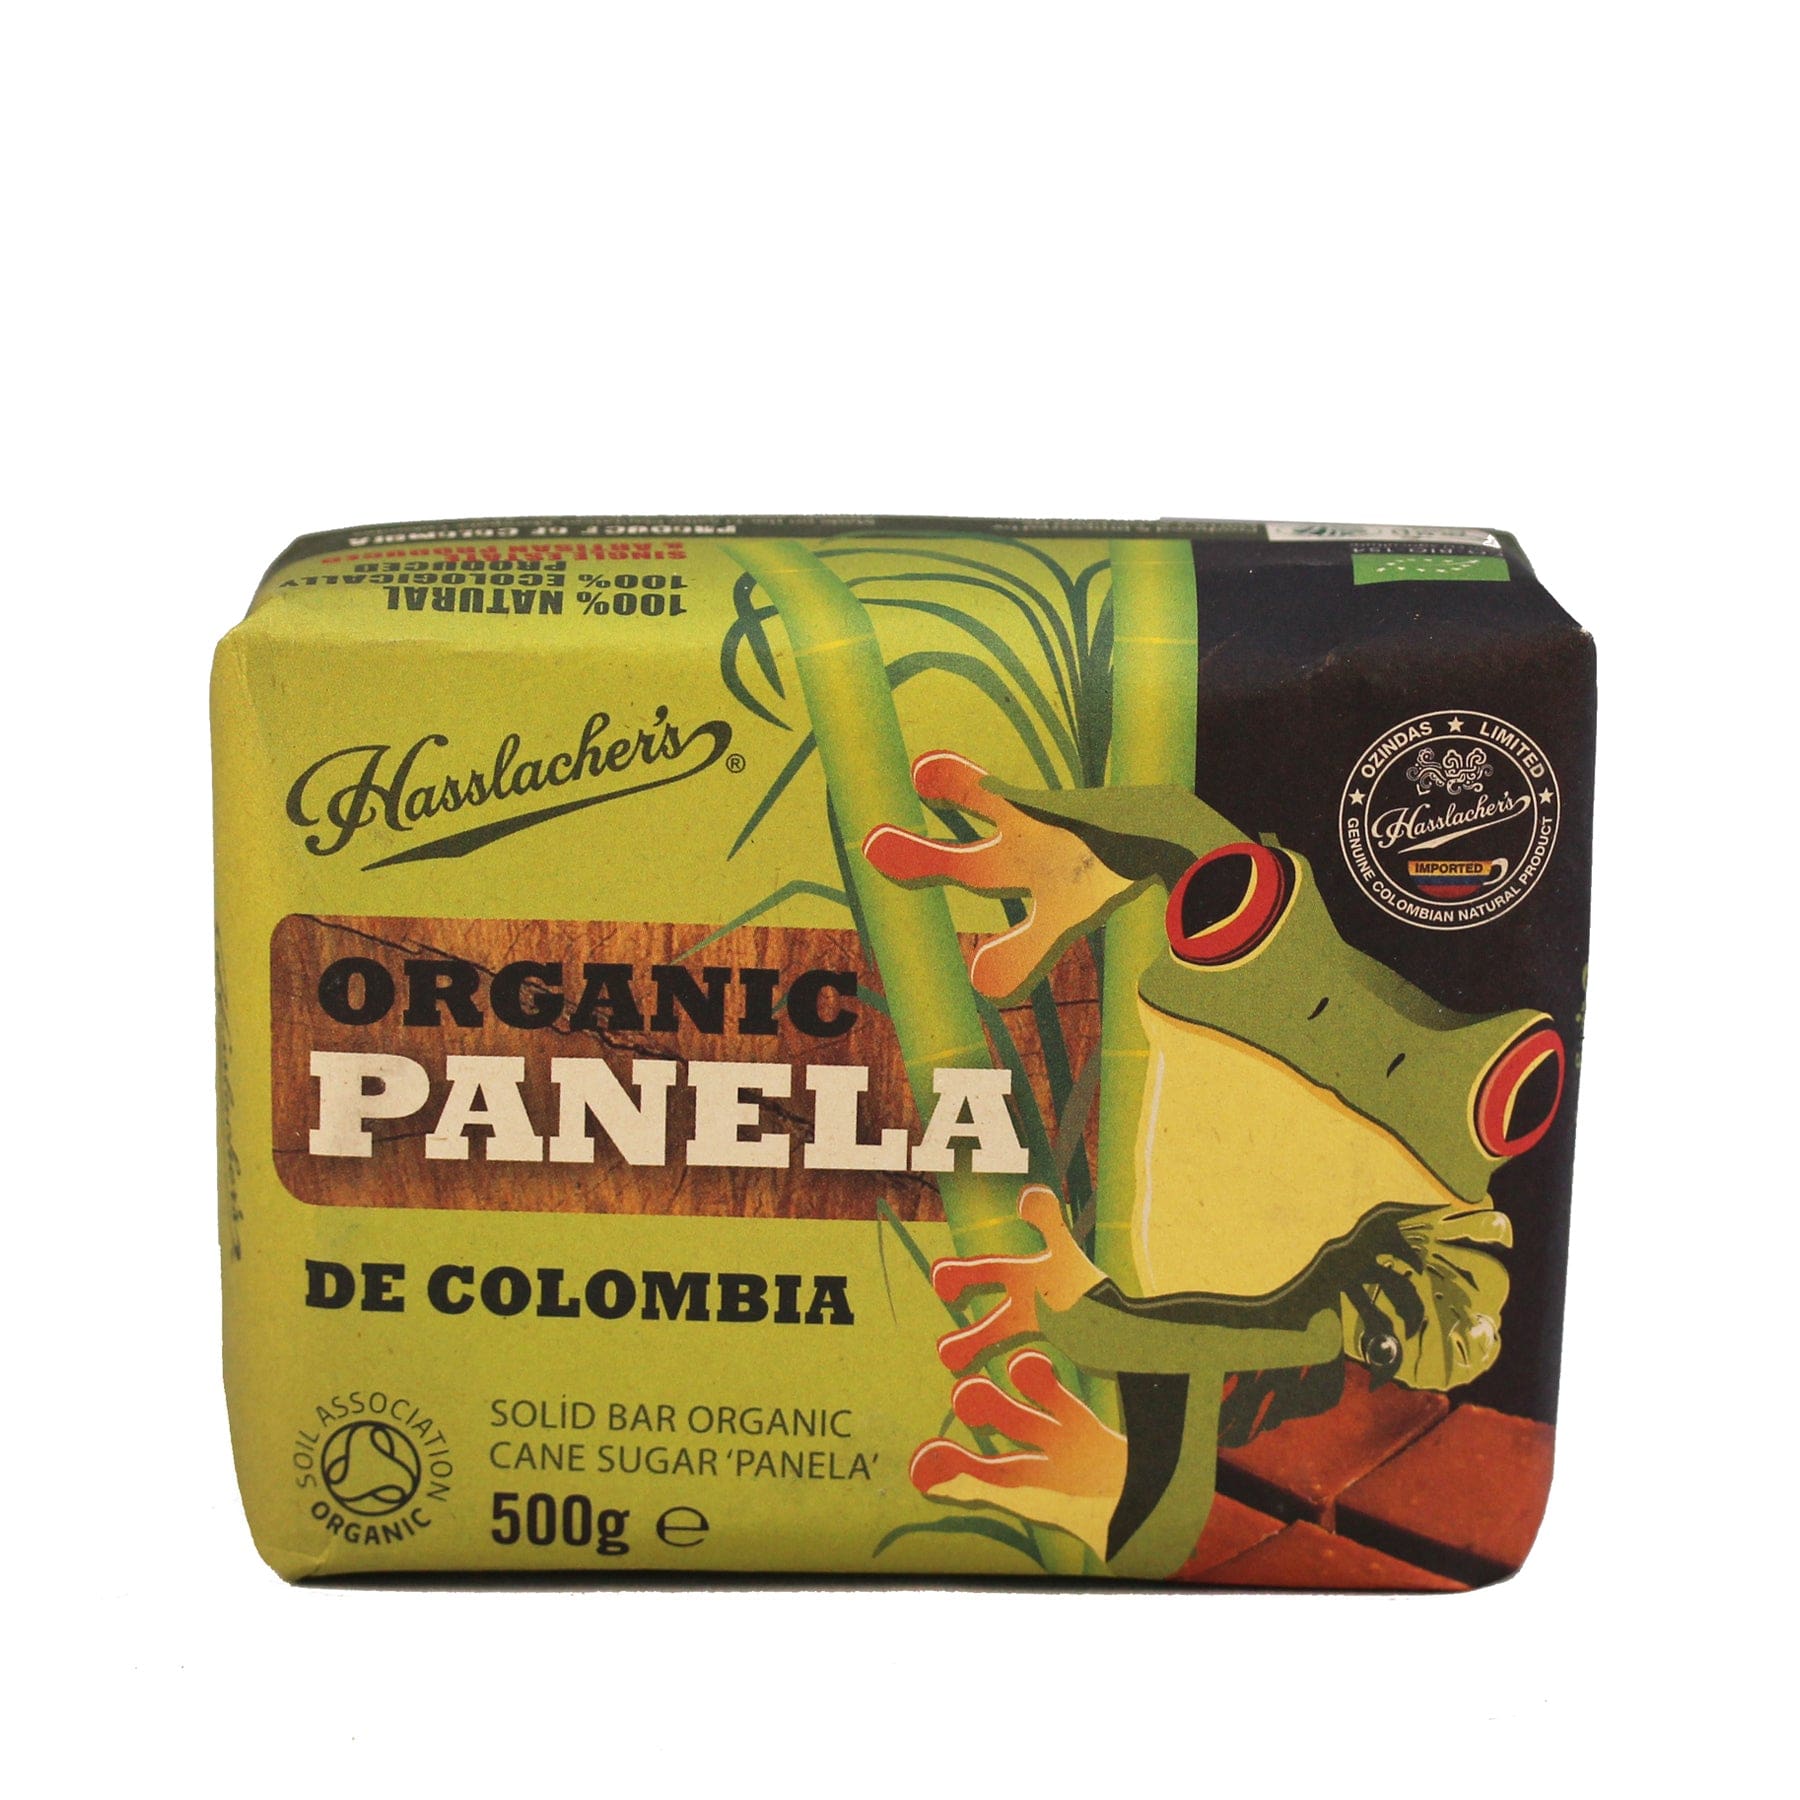 Alt text: Hasslacher's Organic Panela de Colombia, solid bar cane sugar panela, 500g with frog illustration and sugarcane imagery on the packaging.